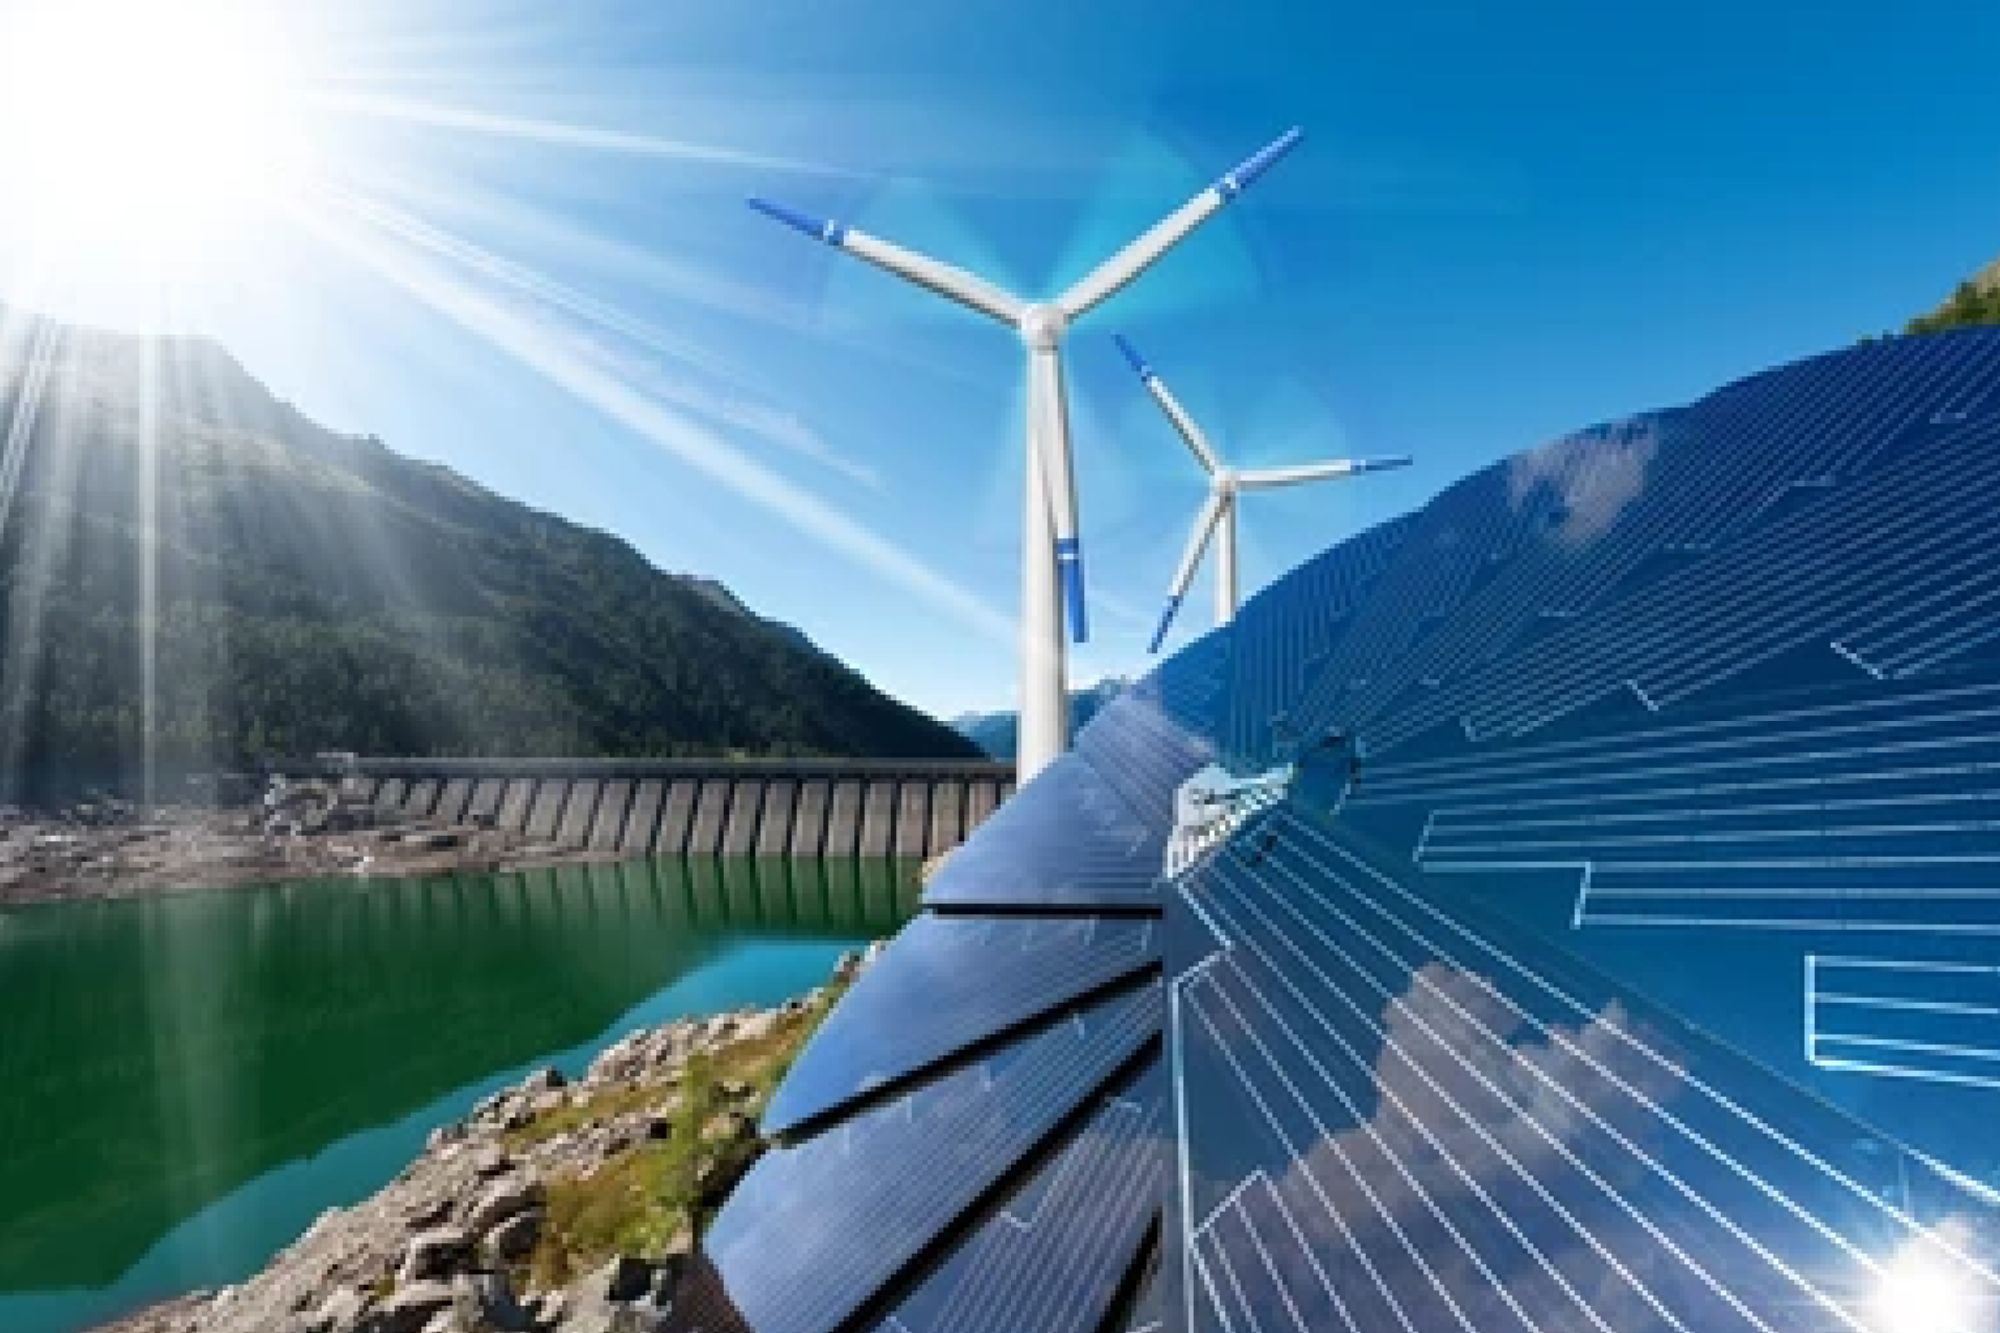 SgurrEnergy achieves 100 GW of project experience globally in renewables